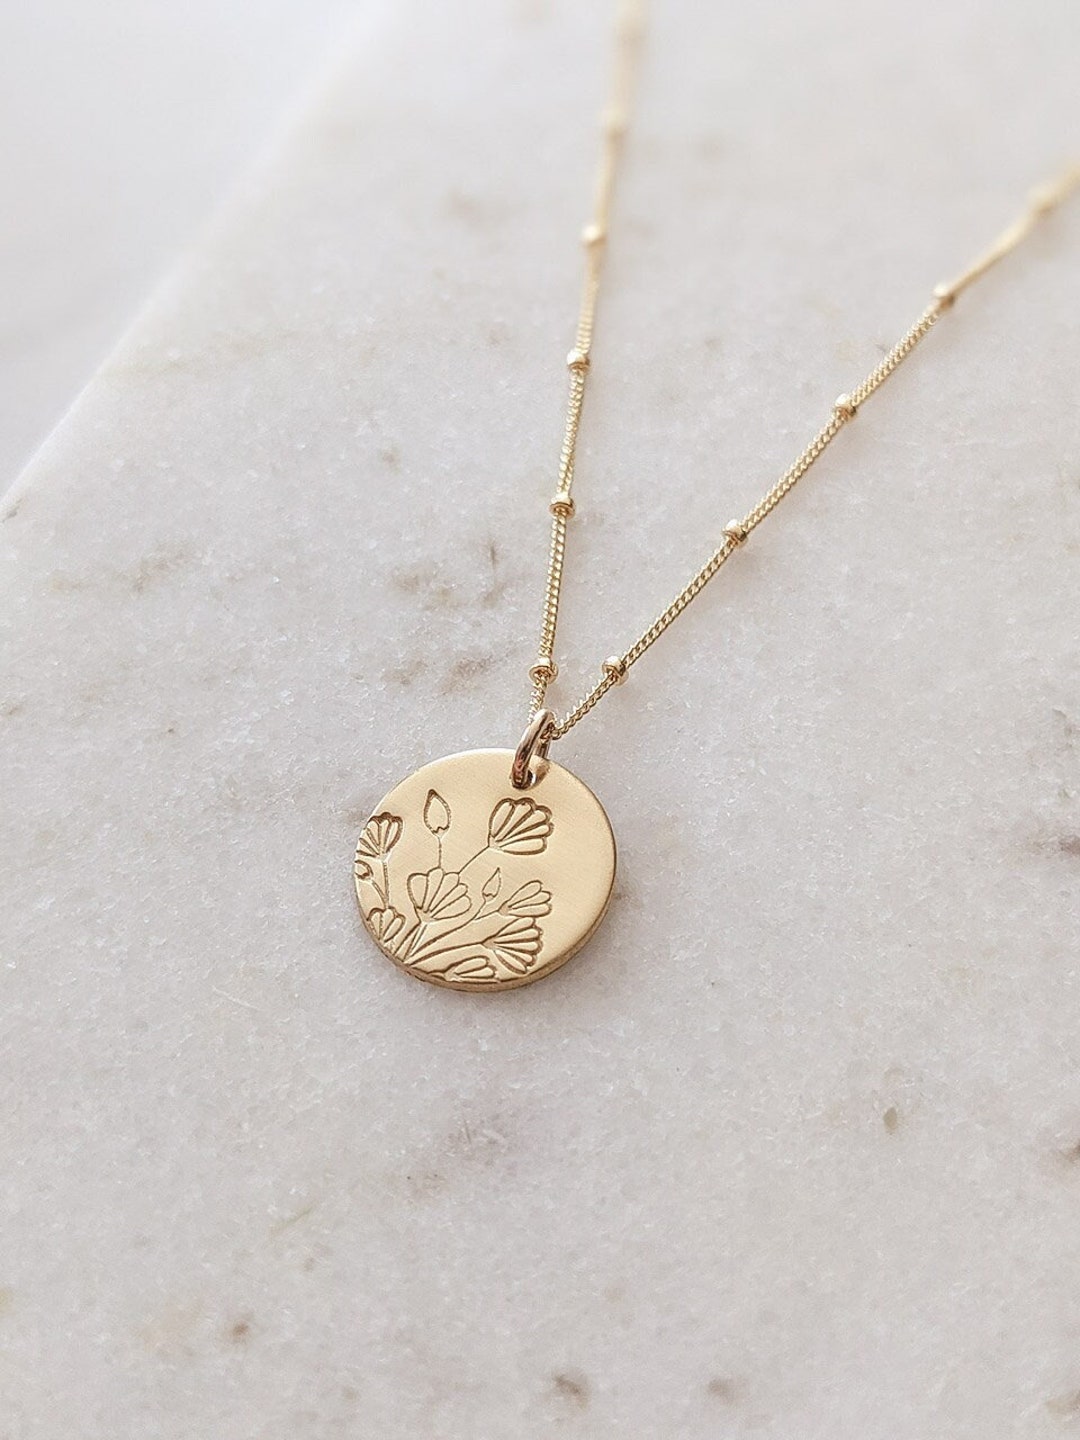 Wildflower Necklace in 14k Gold Filled or Sterling Silver - Etsy